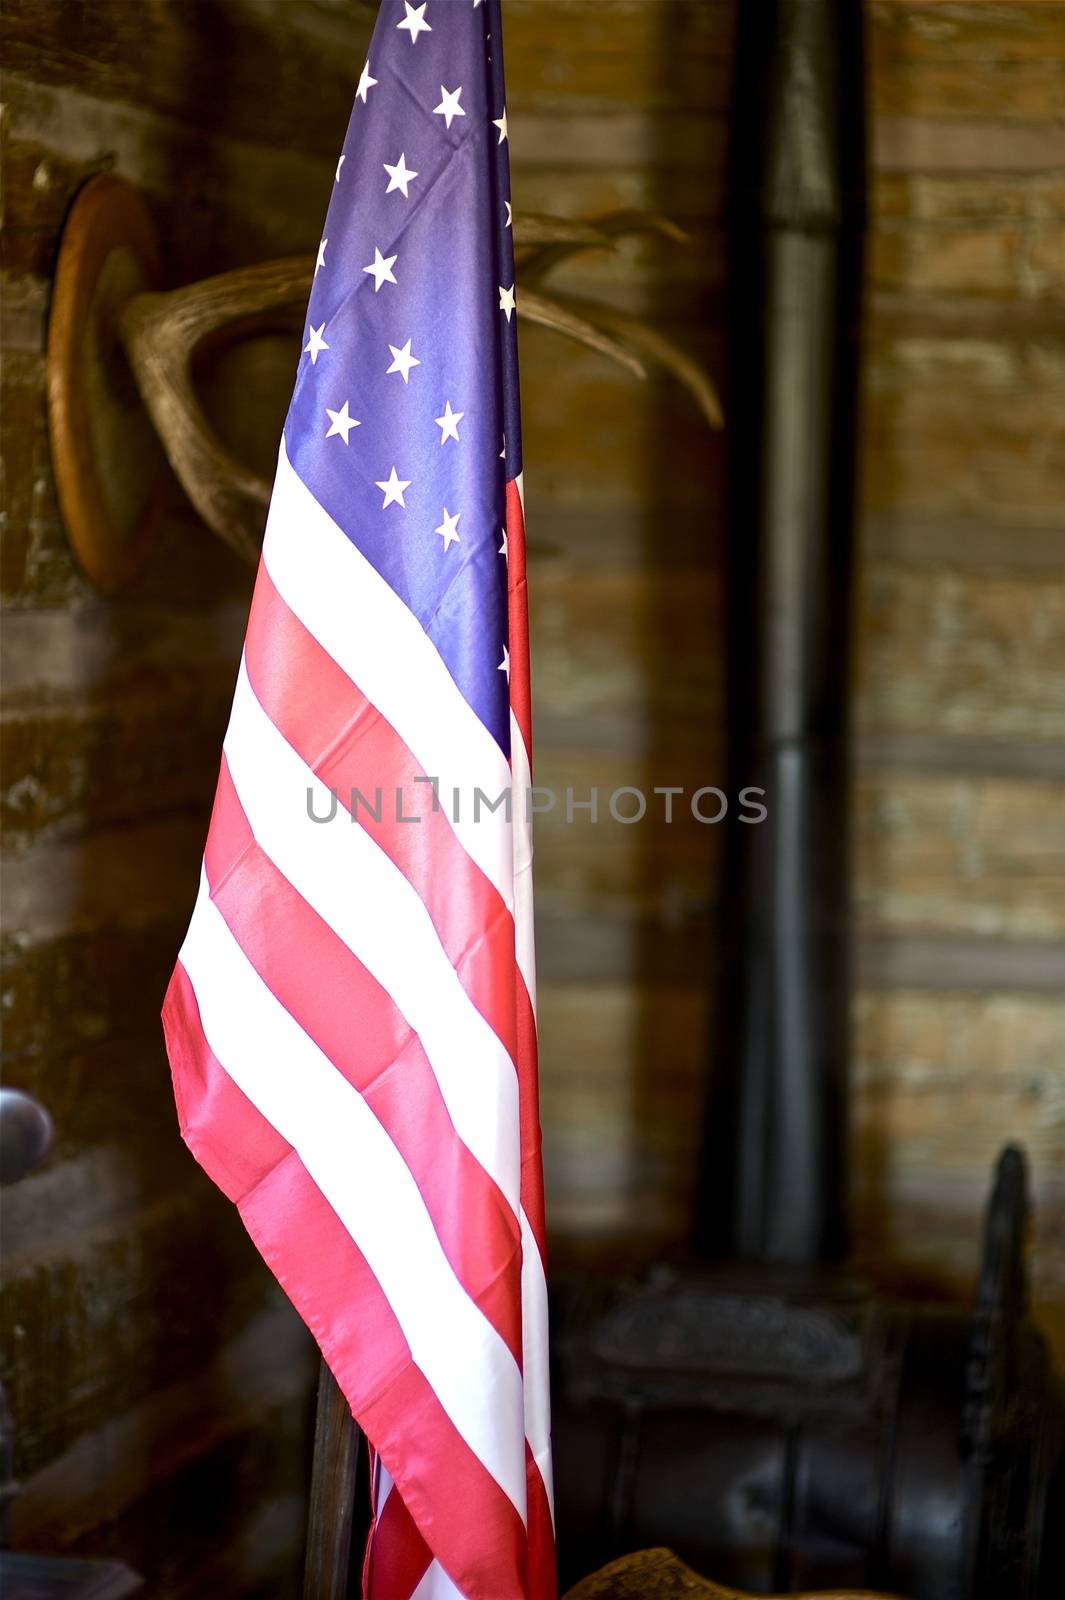 North American Flag. United States of America Flag on Stand in the Vintage Far West Wood Room. Vertical Photo